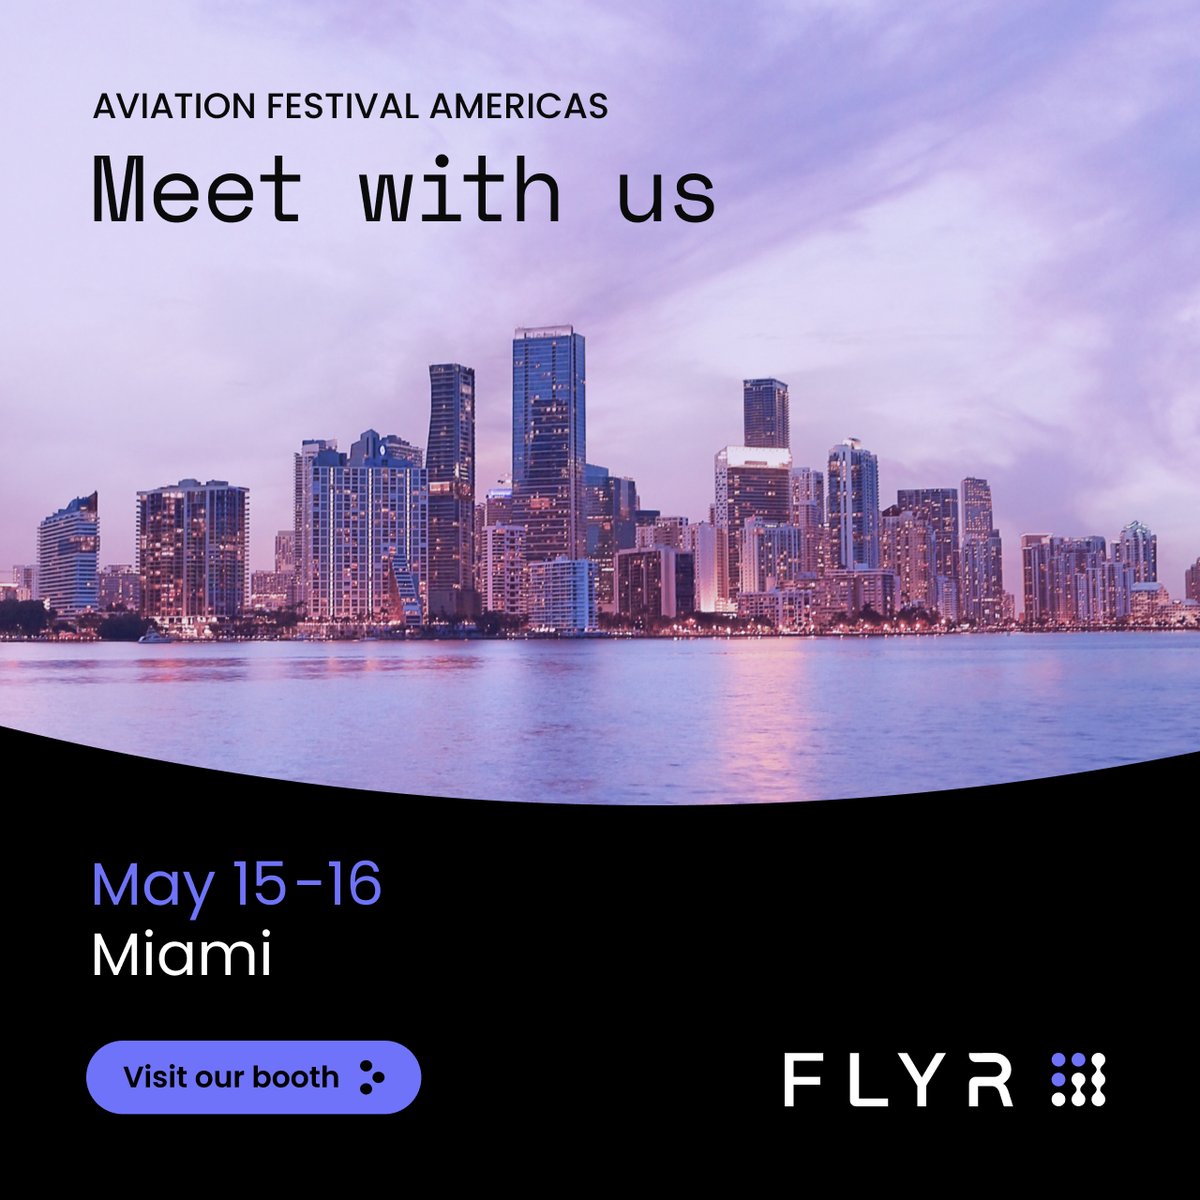 Headed to Miami 15 - 16 May for Aviation Fesitval Americas? FLYR is proud to be a Platinum Sponsor for this event! Visit us at booth# 200 to learn more. #AviationFestivalAmericas #TravelTechnology #Innovation